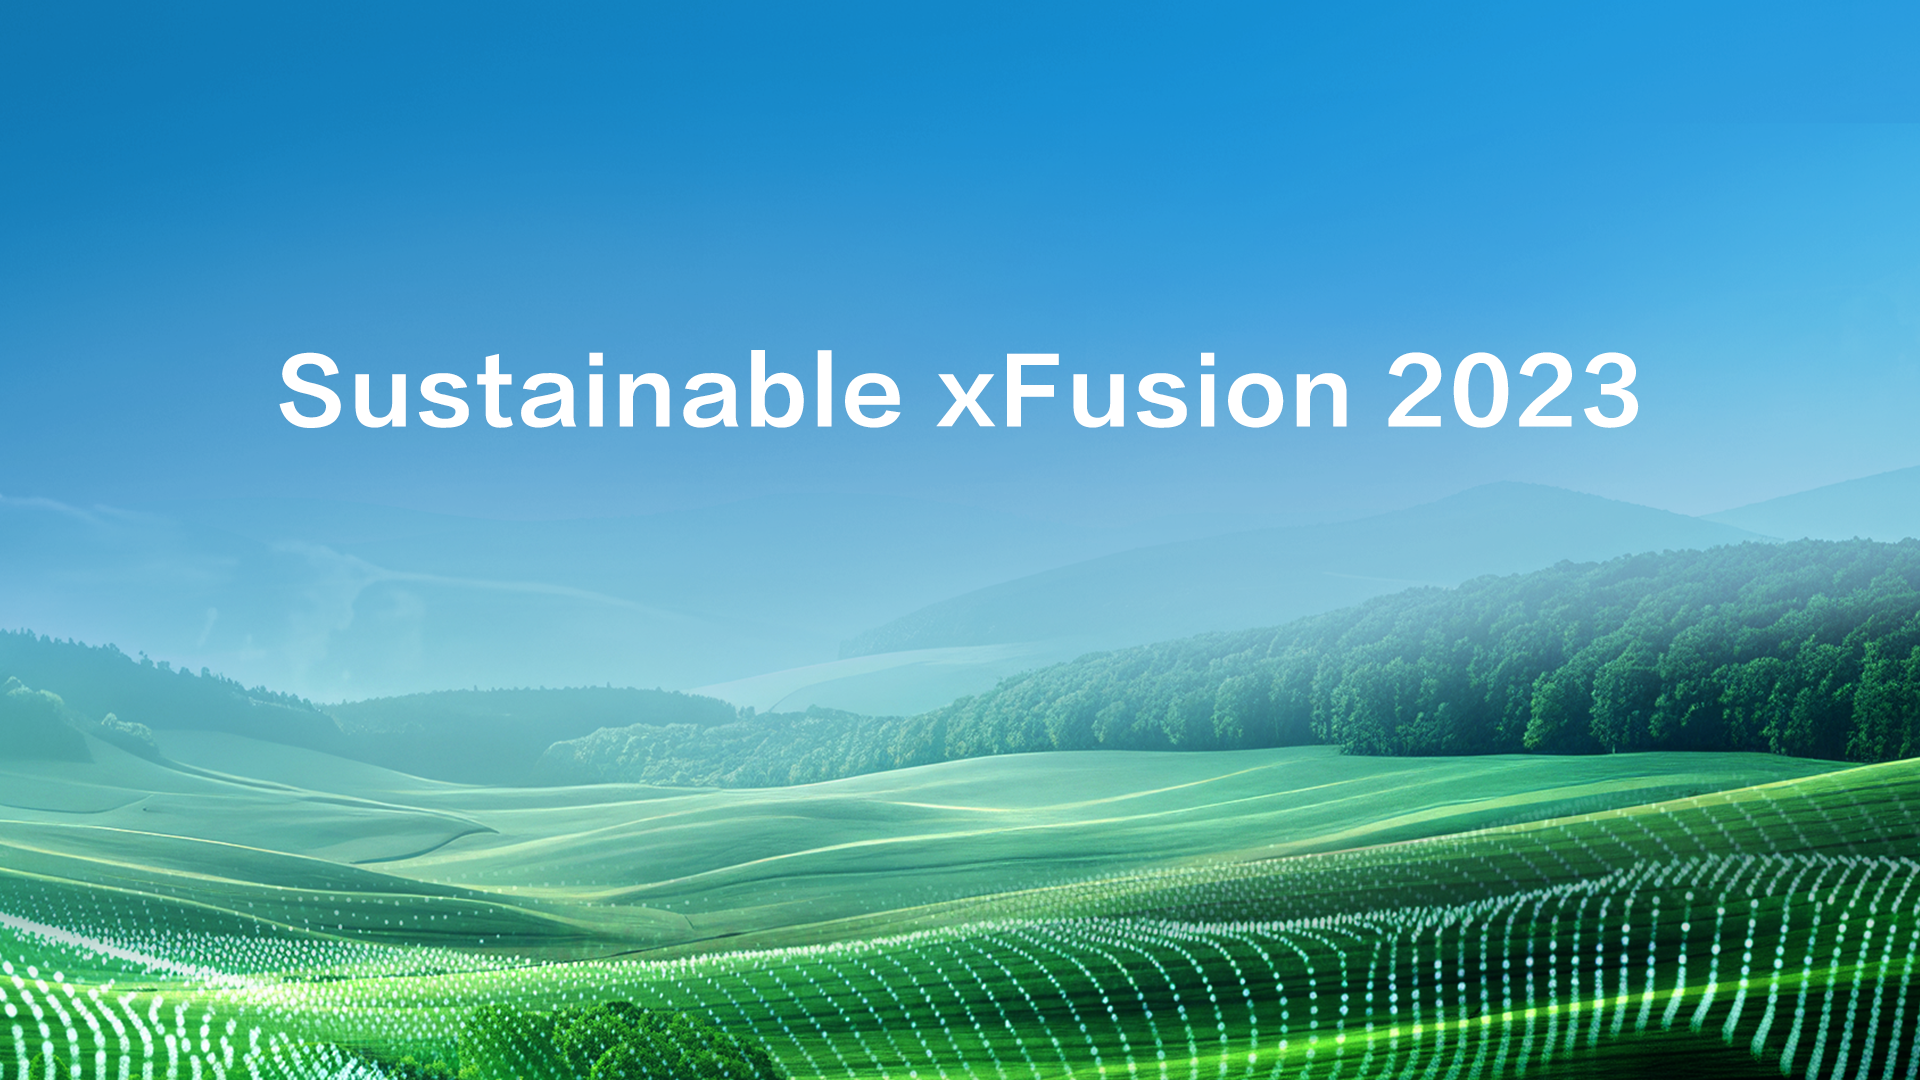 xFusion Releases Sustainability Report, Accelerating the Creation of a Sustainable Digital World